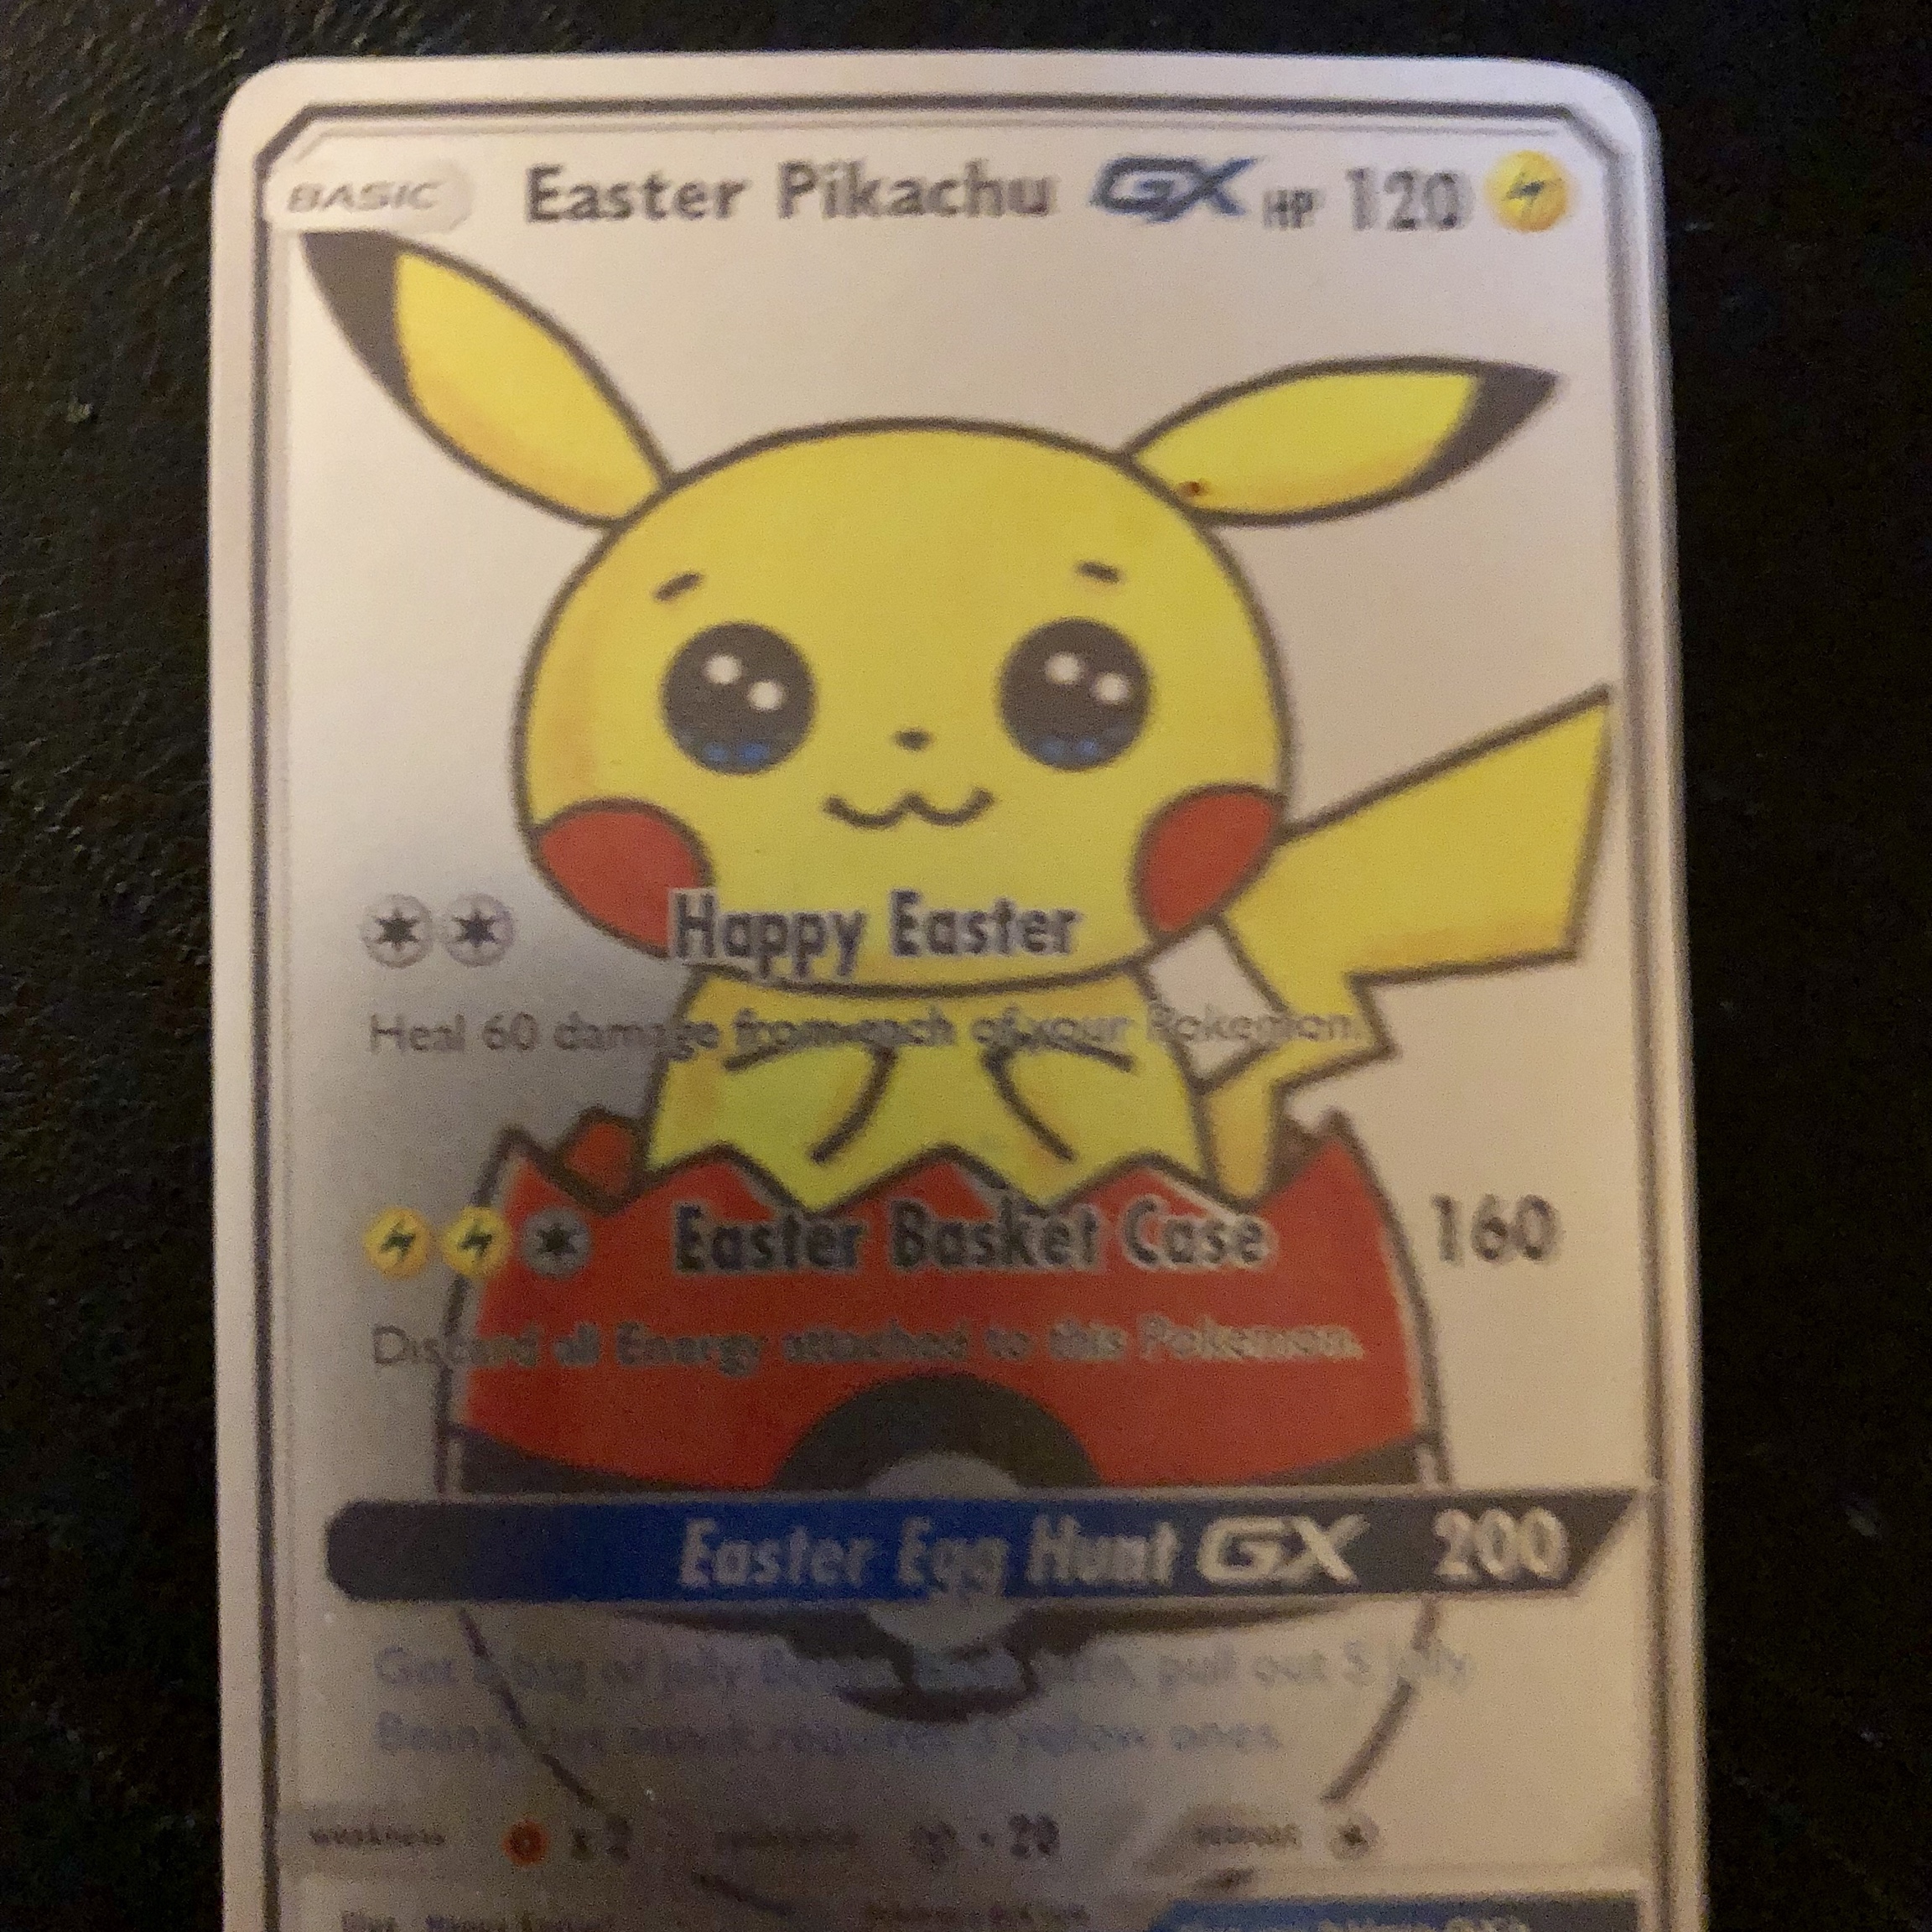 Pokemon HD: How To Make Your Own Pokemon Card Gx